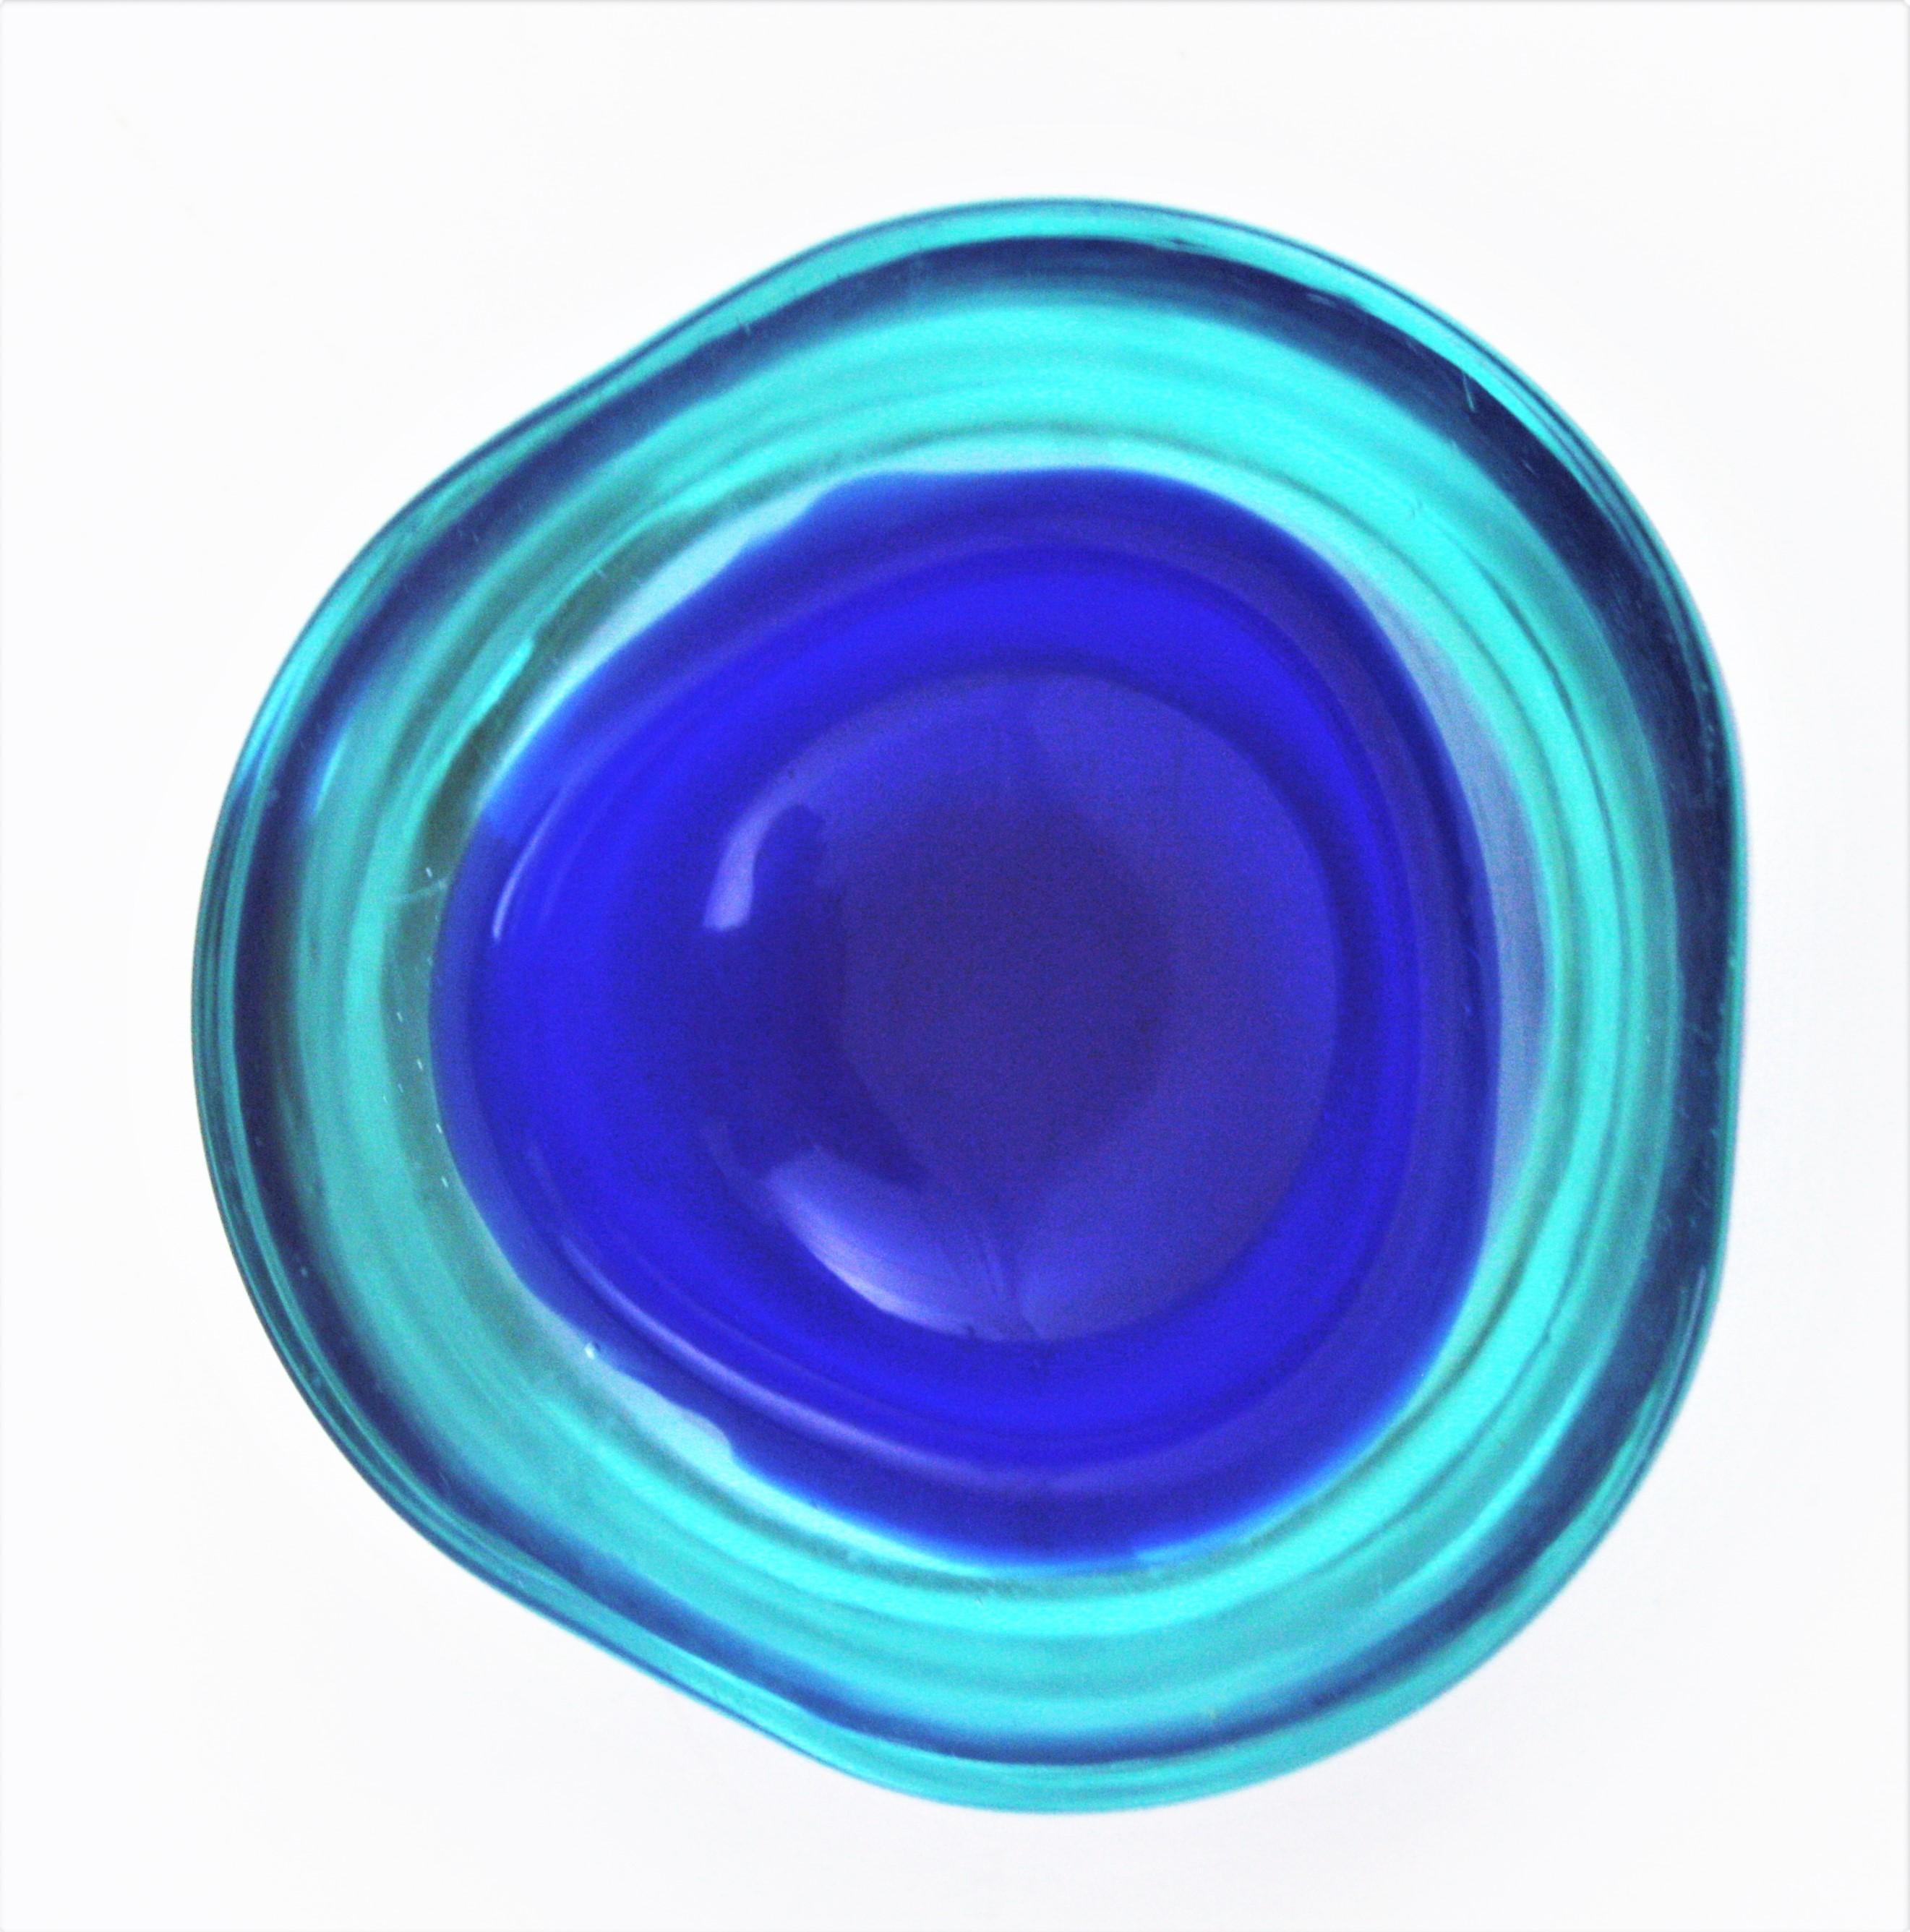 Archimede Seguso Murano Small Sommerso Blue Glass Geode Bowl, 1960s For Sale 7